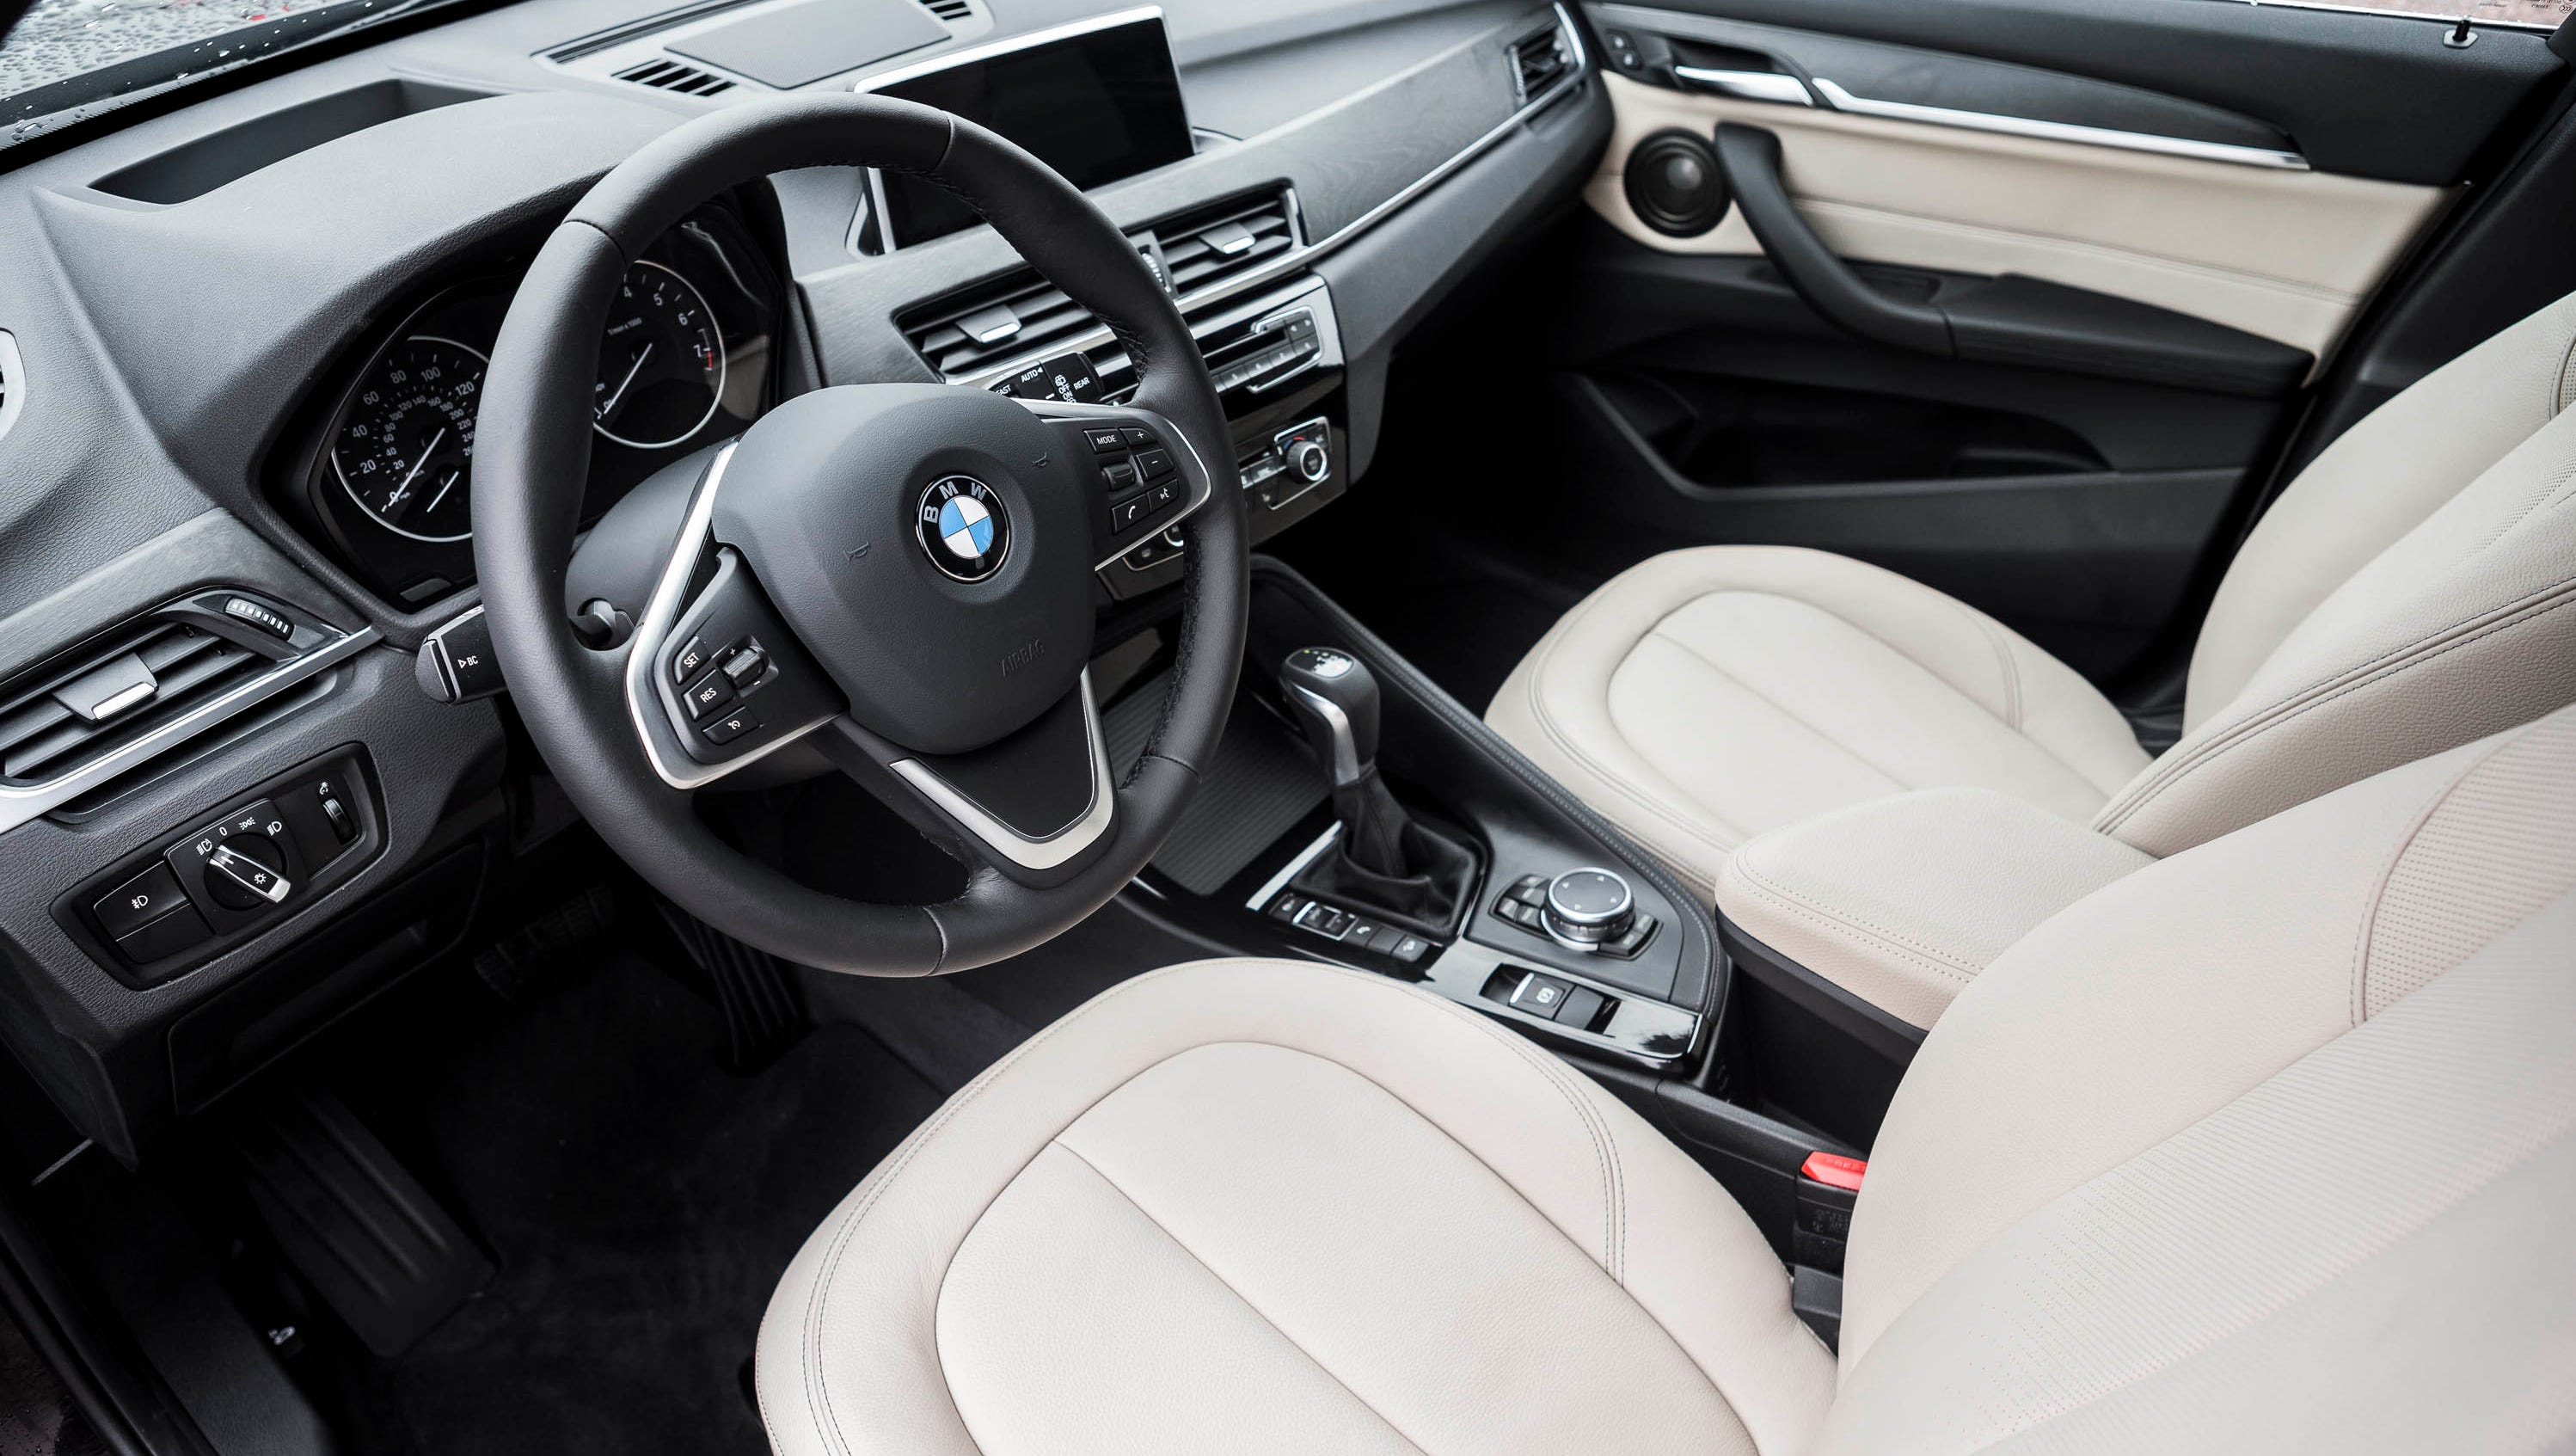 Review: BMW X1 small SUV struggles to find its place